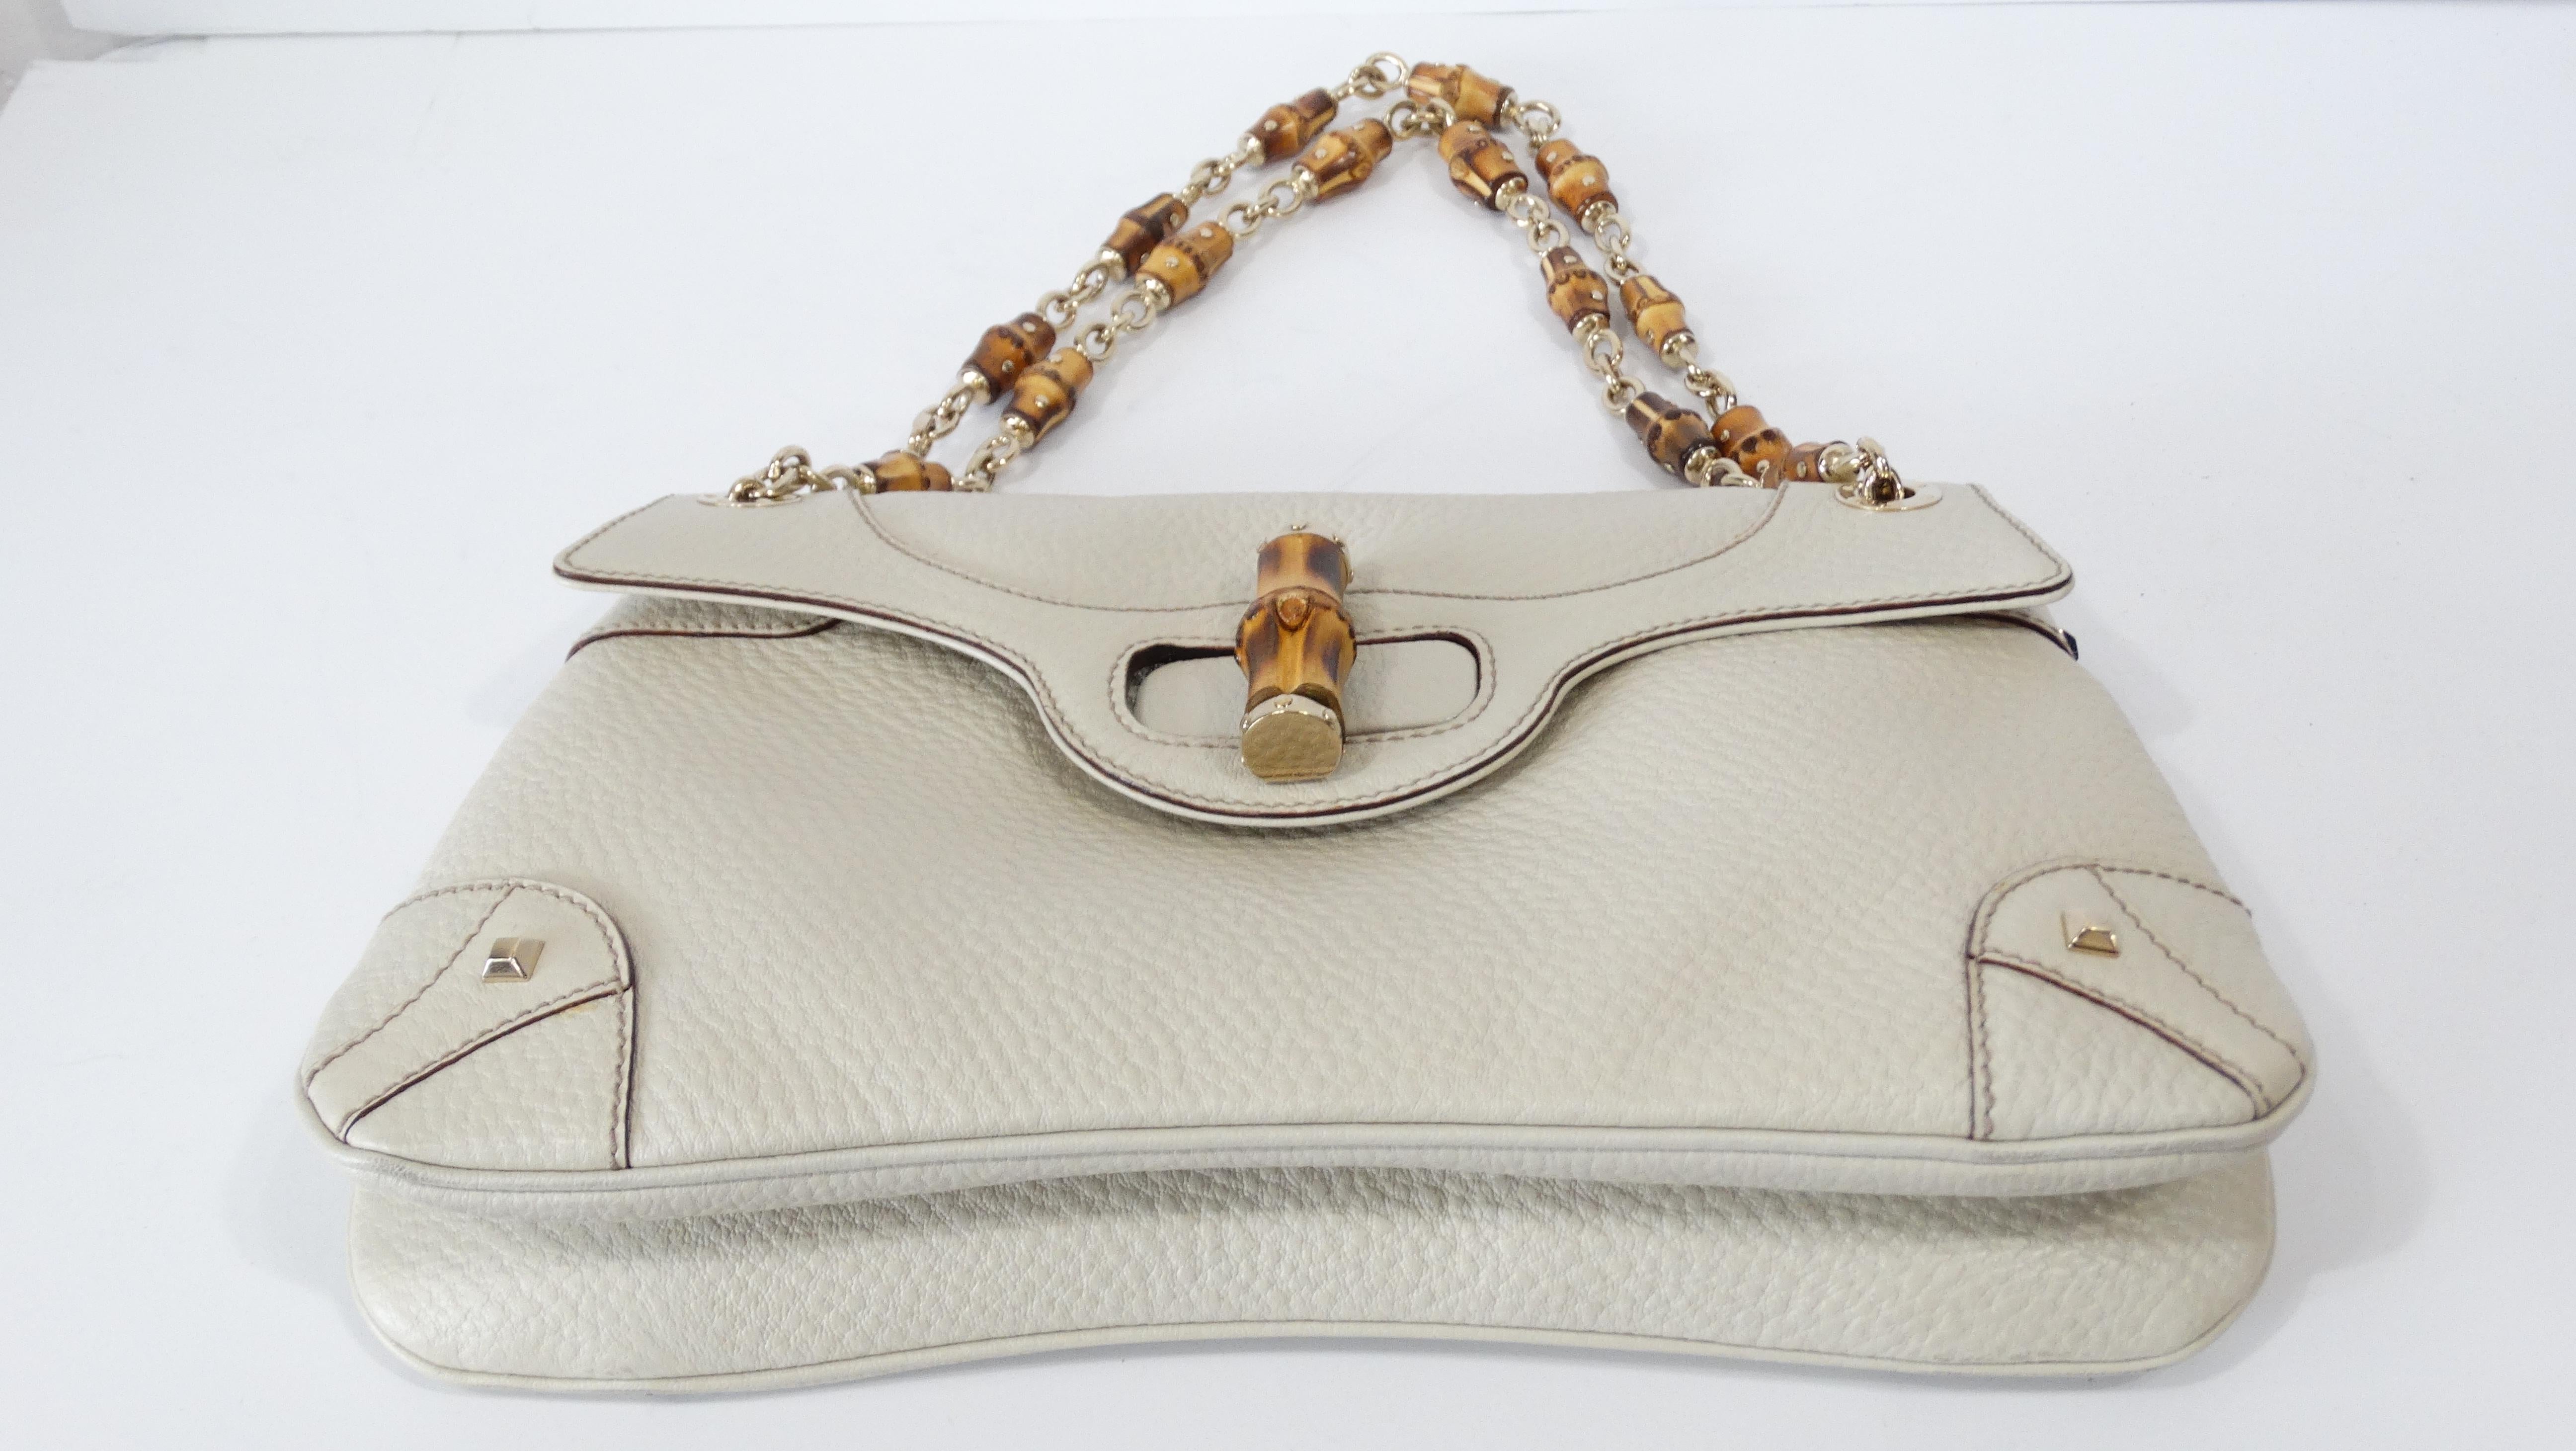 Tom Ford For Gucci 2000s Cream Pebbled Leather Bamboo Shoulder Bag 5